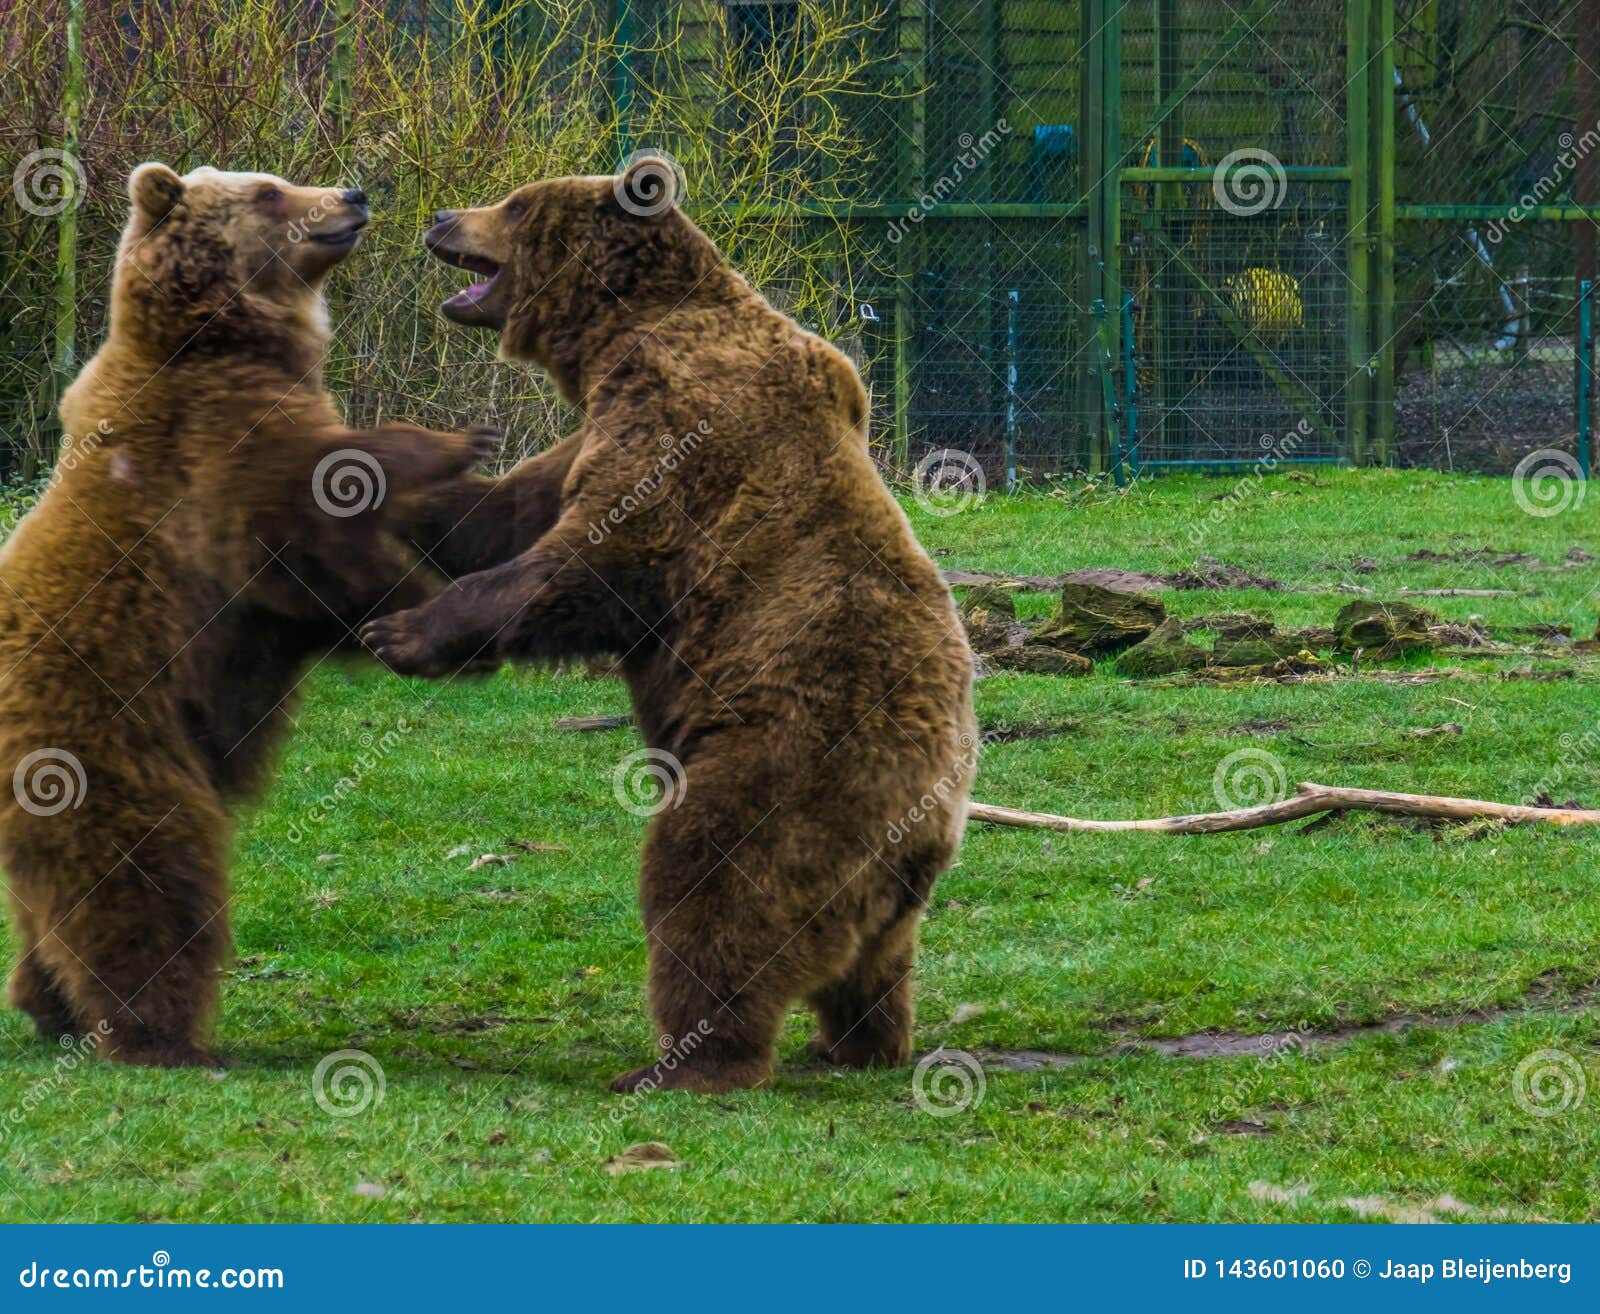 two funny brown bears playing with each other, common animals in eurasia